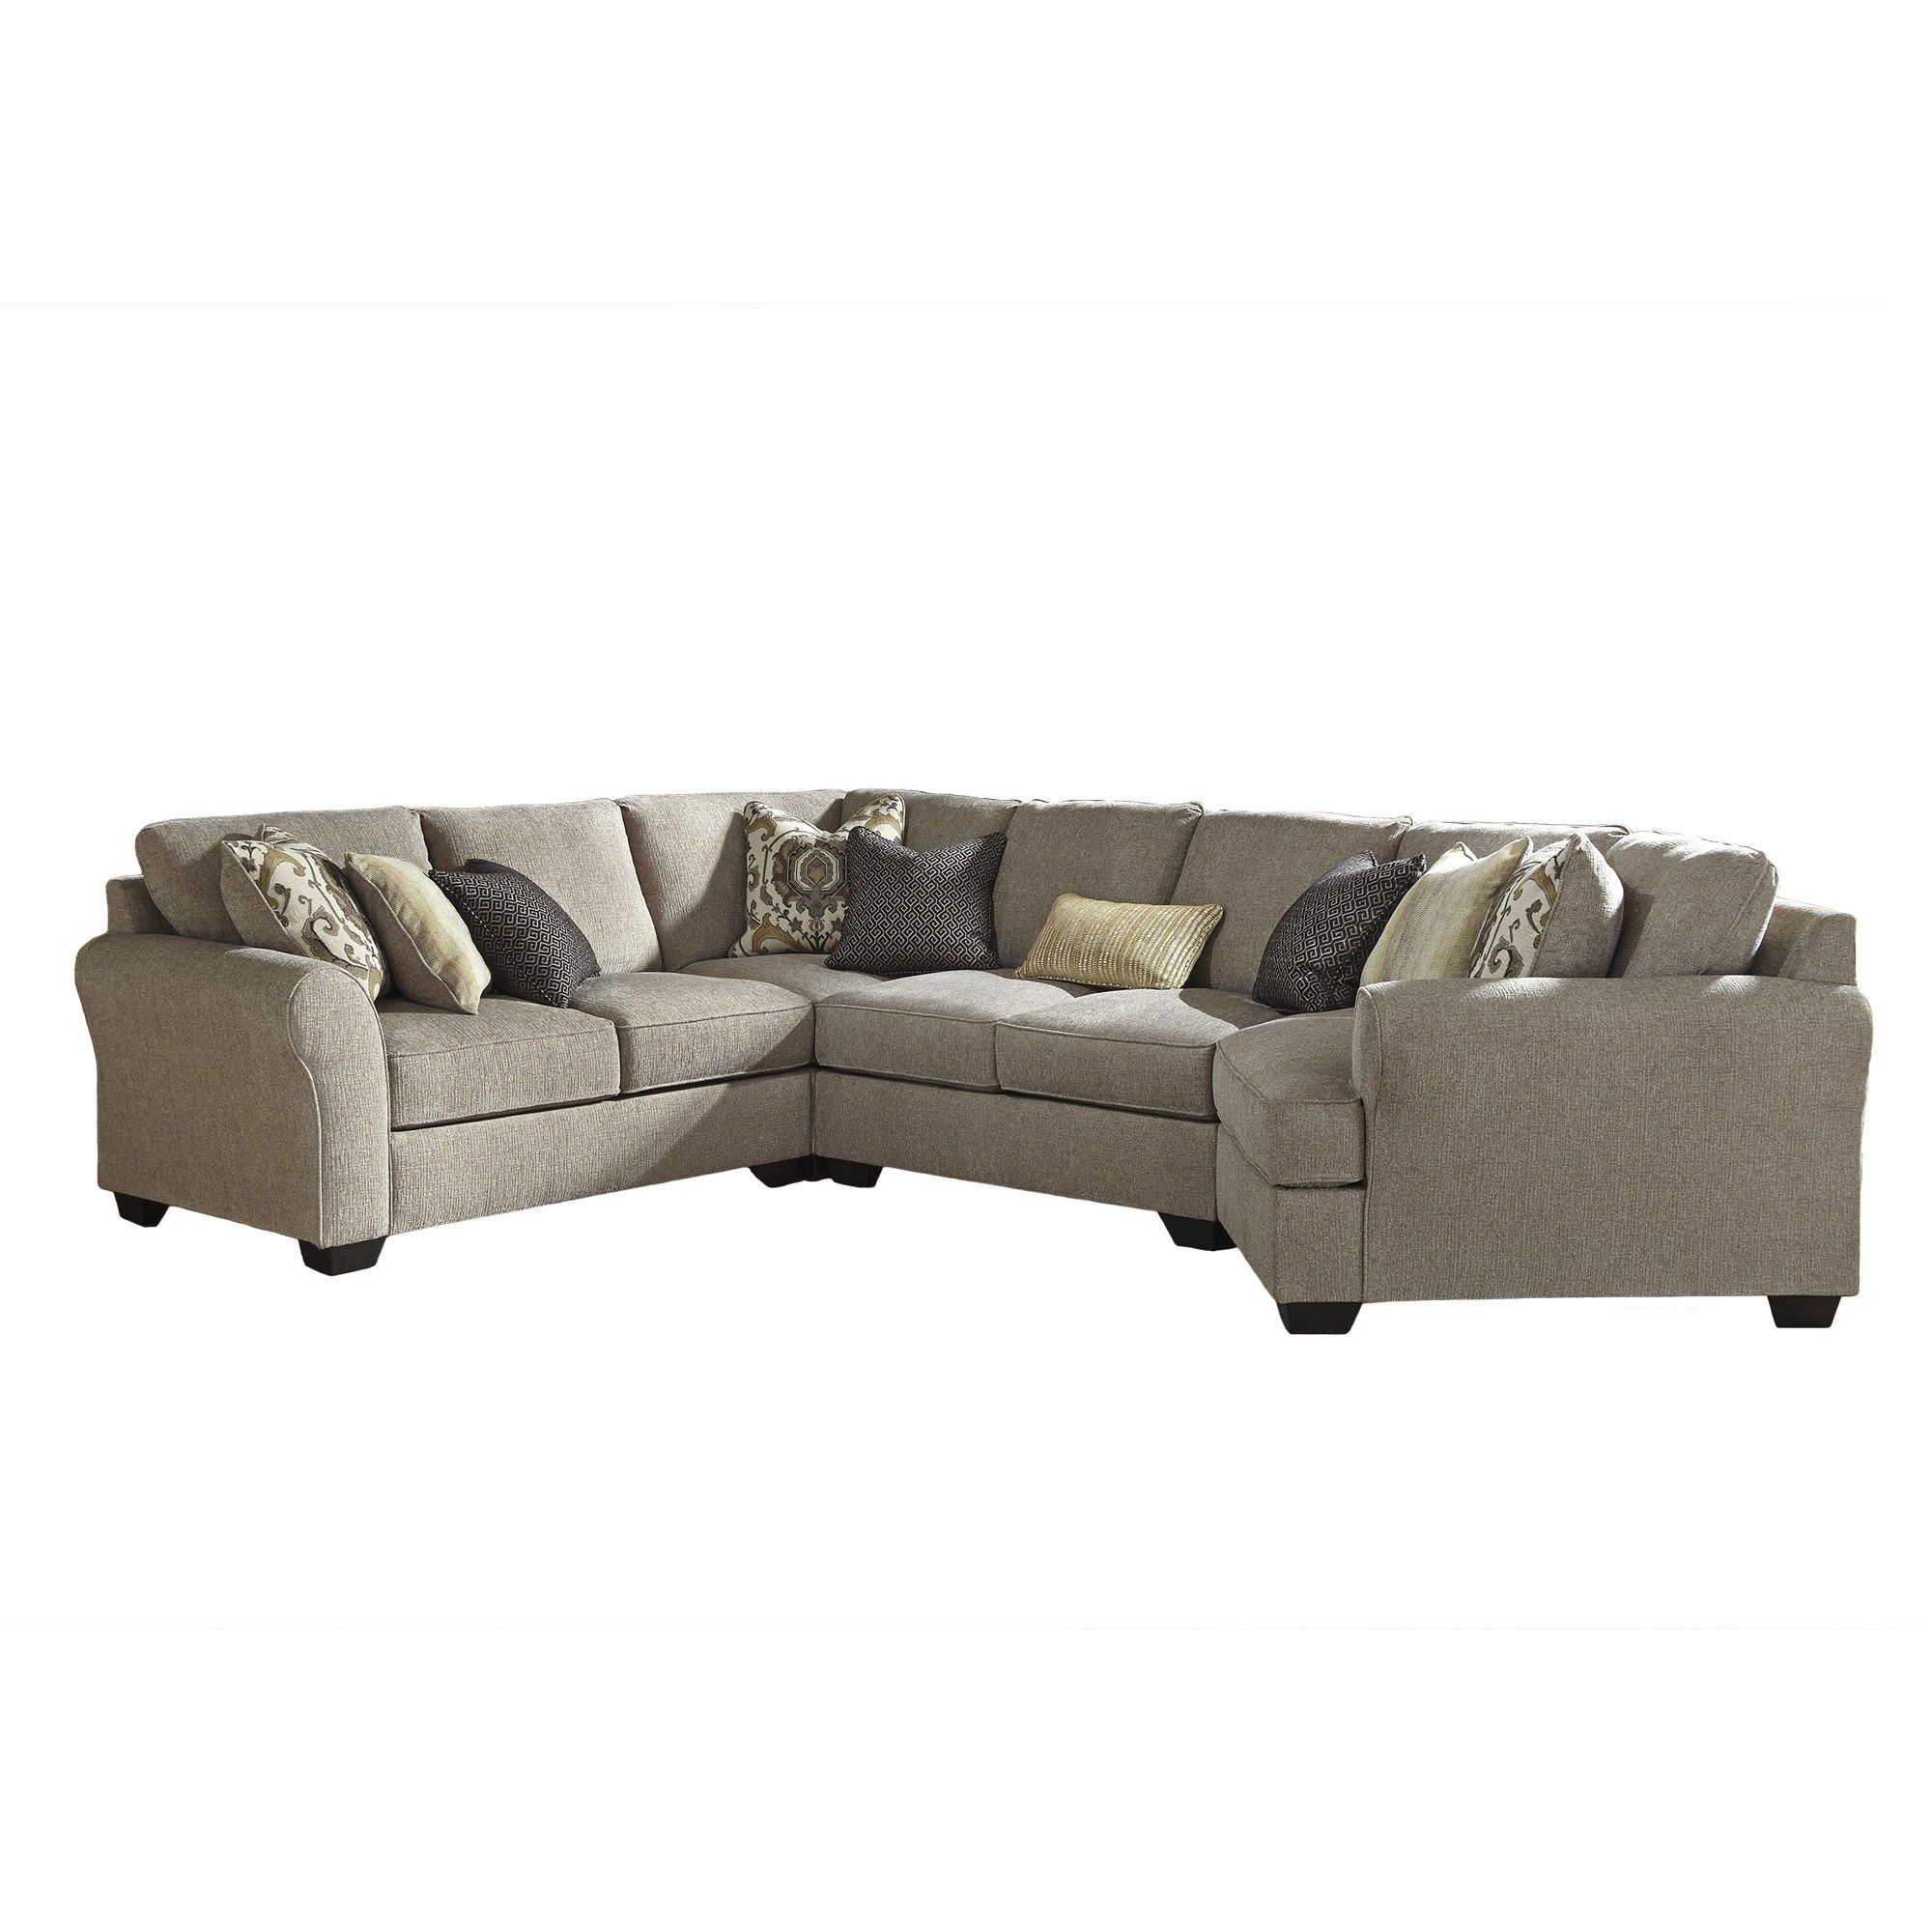 Pantomine Right Hand Facing 4 Piece Sectional | Tepperman's Regarding Teppermans Sectional Sofas (View 10 of 10)